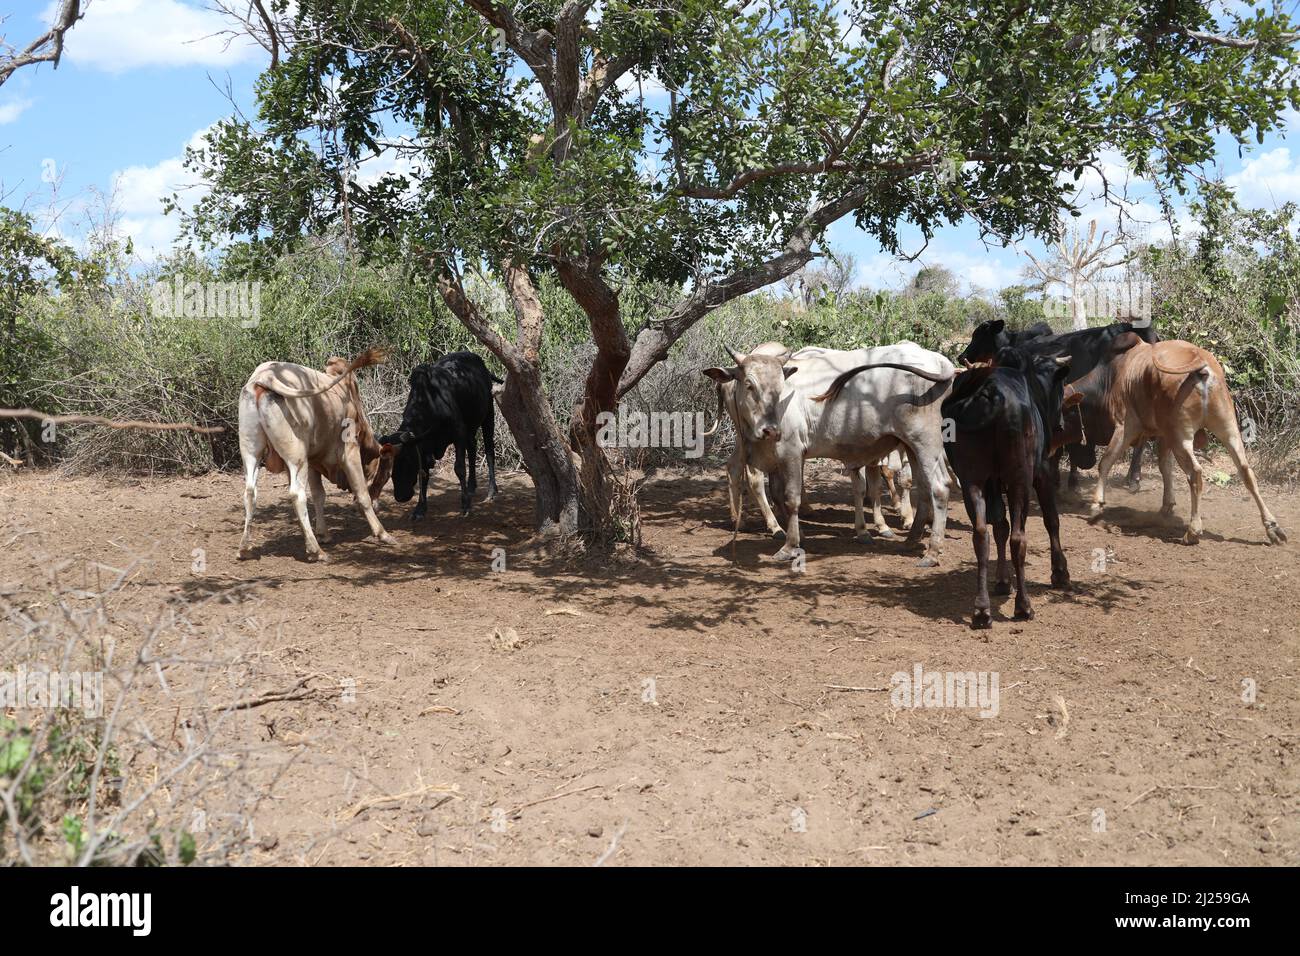 (220330) -- KILIFI, March 30, 2022 (Xinhua) -- The only eight remaining cows in Caroline's home are seen in Kidemu sub-location in Kilifi County, Kenya, March 23, 2022. Scattered on the five-acre farm in Bandari village, Kidemu sub-location in Kenya's coastal Kilifi County, were withered maize crops. Adam Ndamunga, an officer with Kenya National Drought Management Authority (NDMA) in Kilifi, said the drought situation in the region started in August 2021 and has been progressing due to inadequate rains. The United Nations relief agency said the Horn of Africa is experiencing one of its Stock Photo